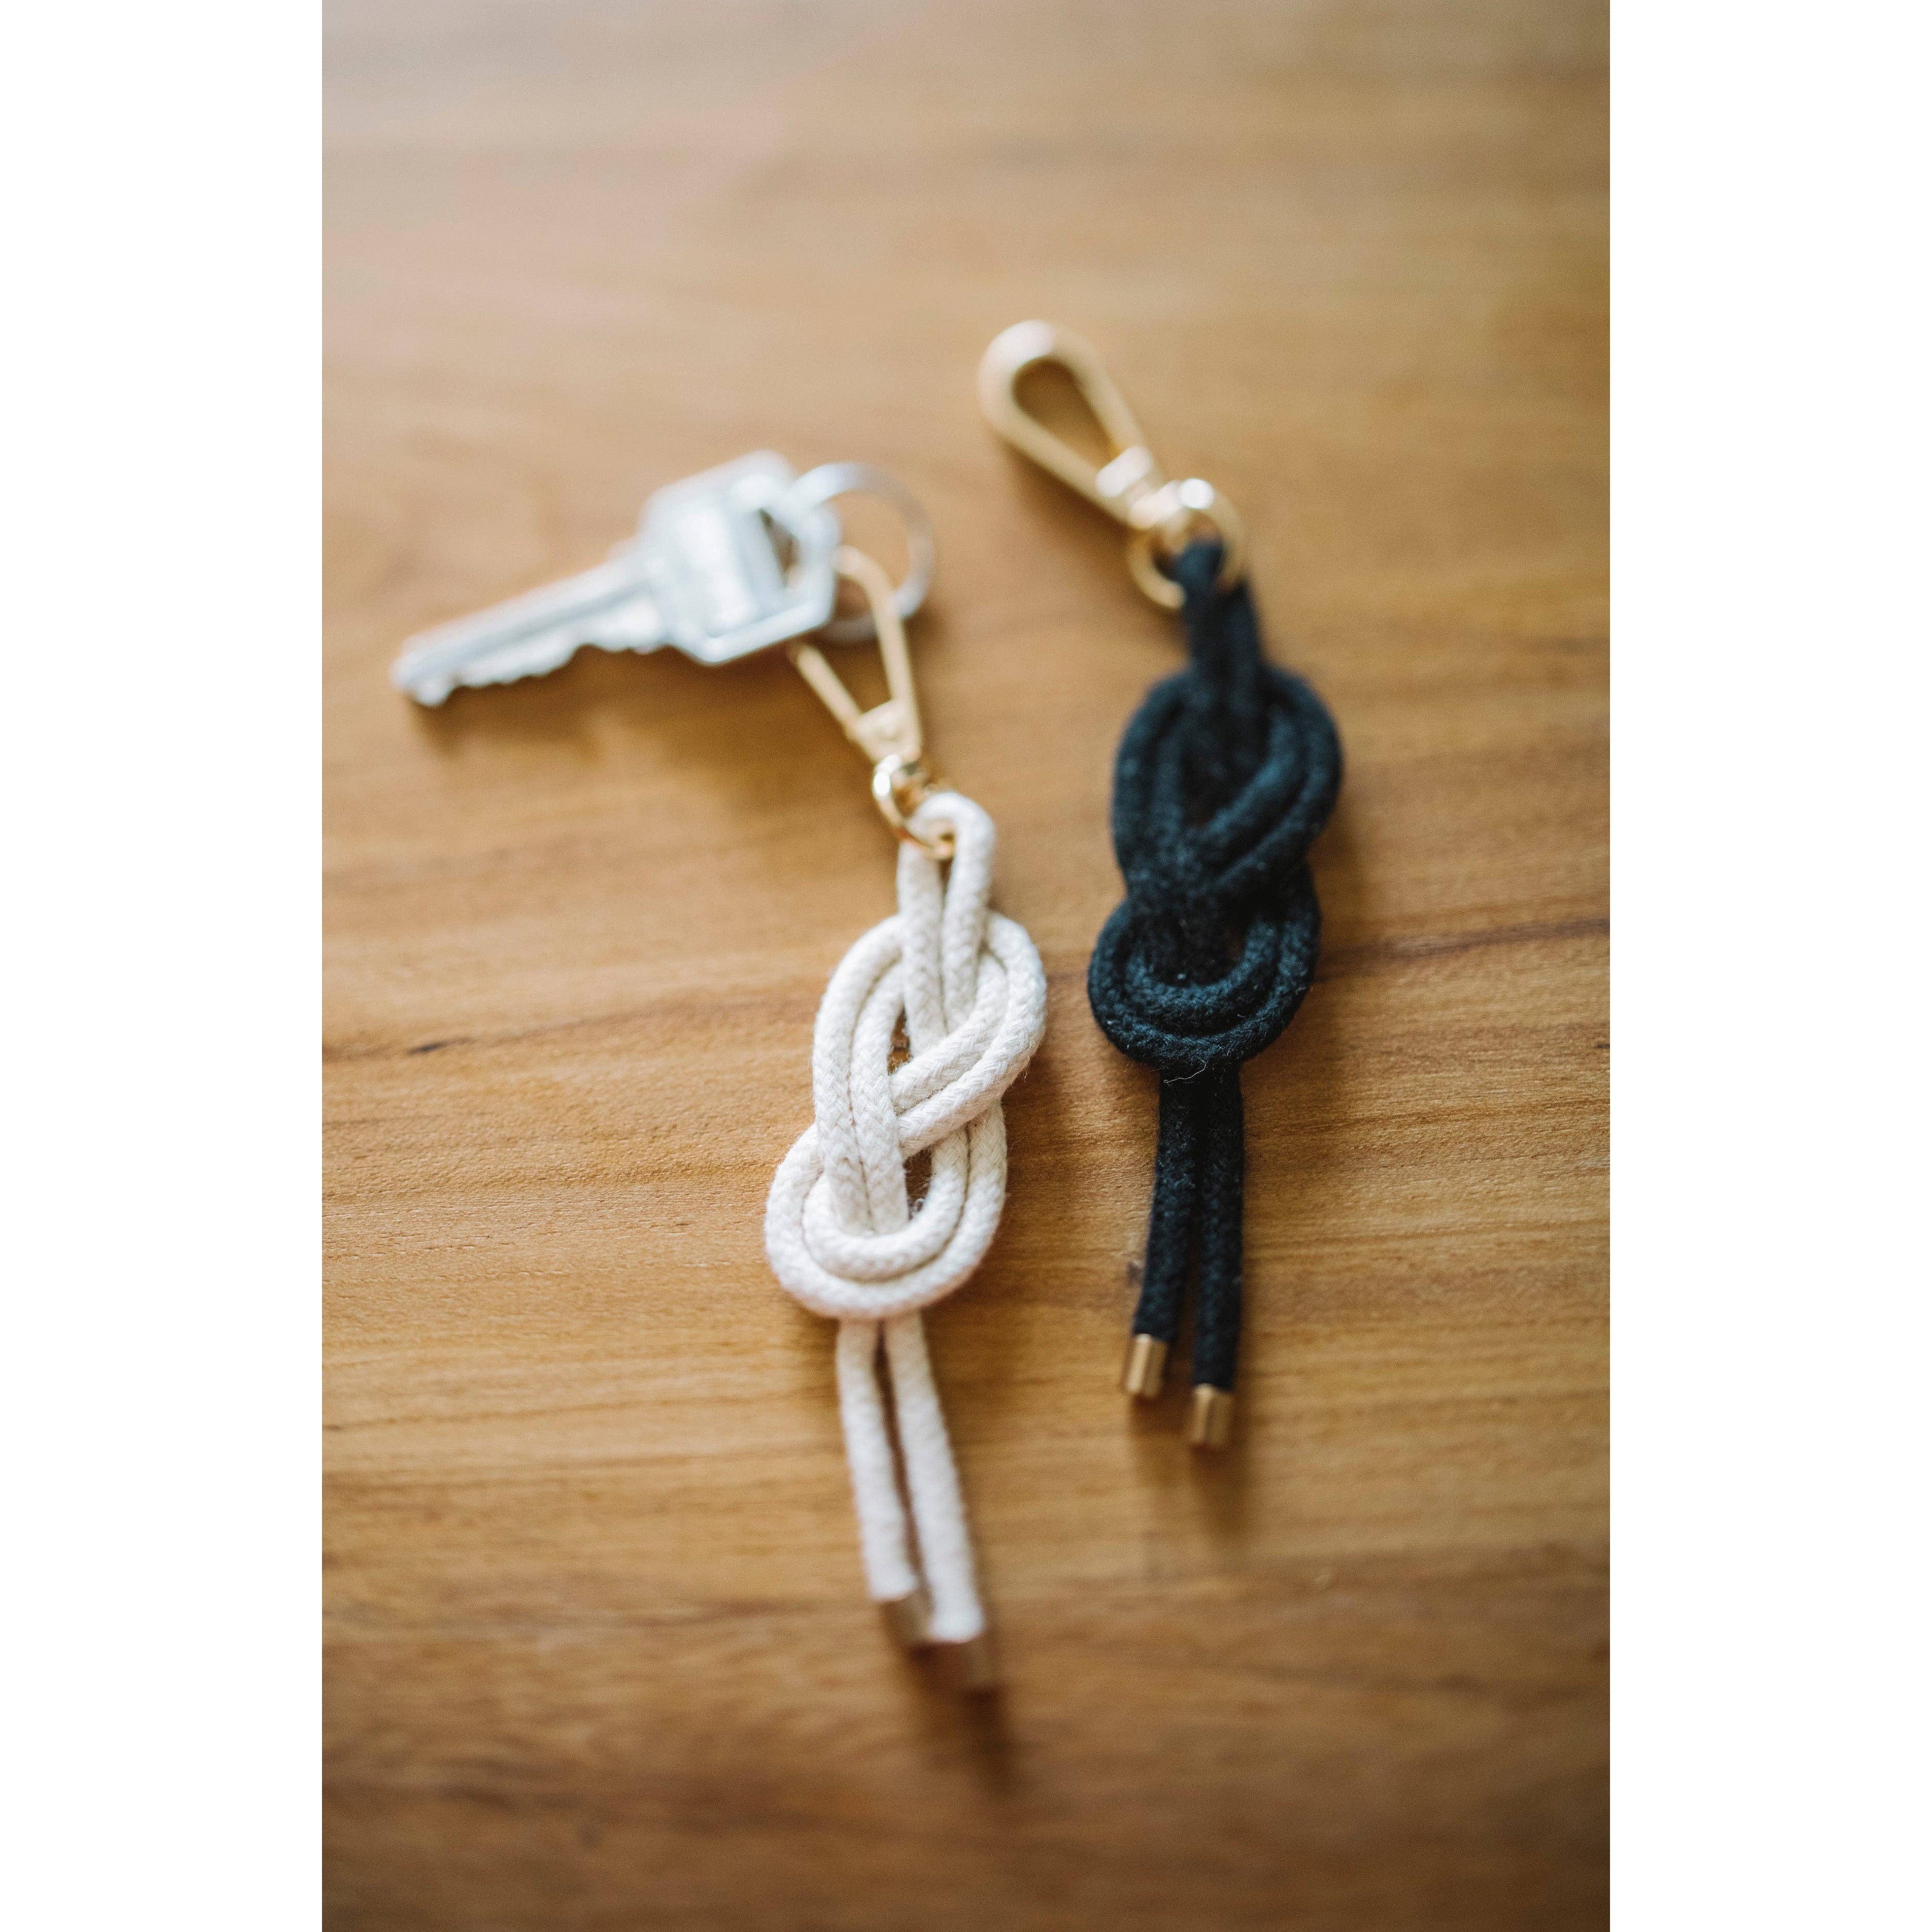 The Courage Knot Keychain